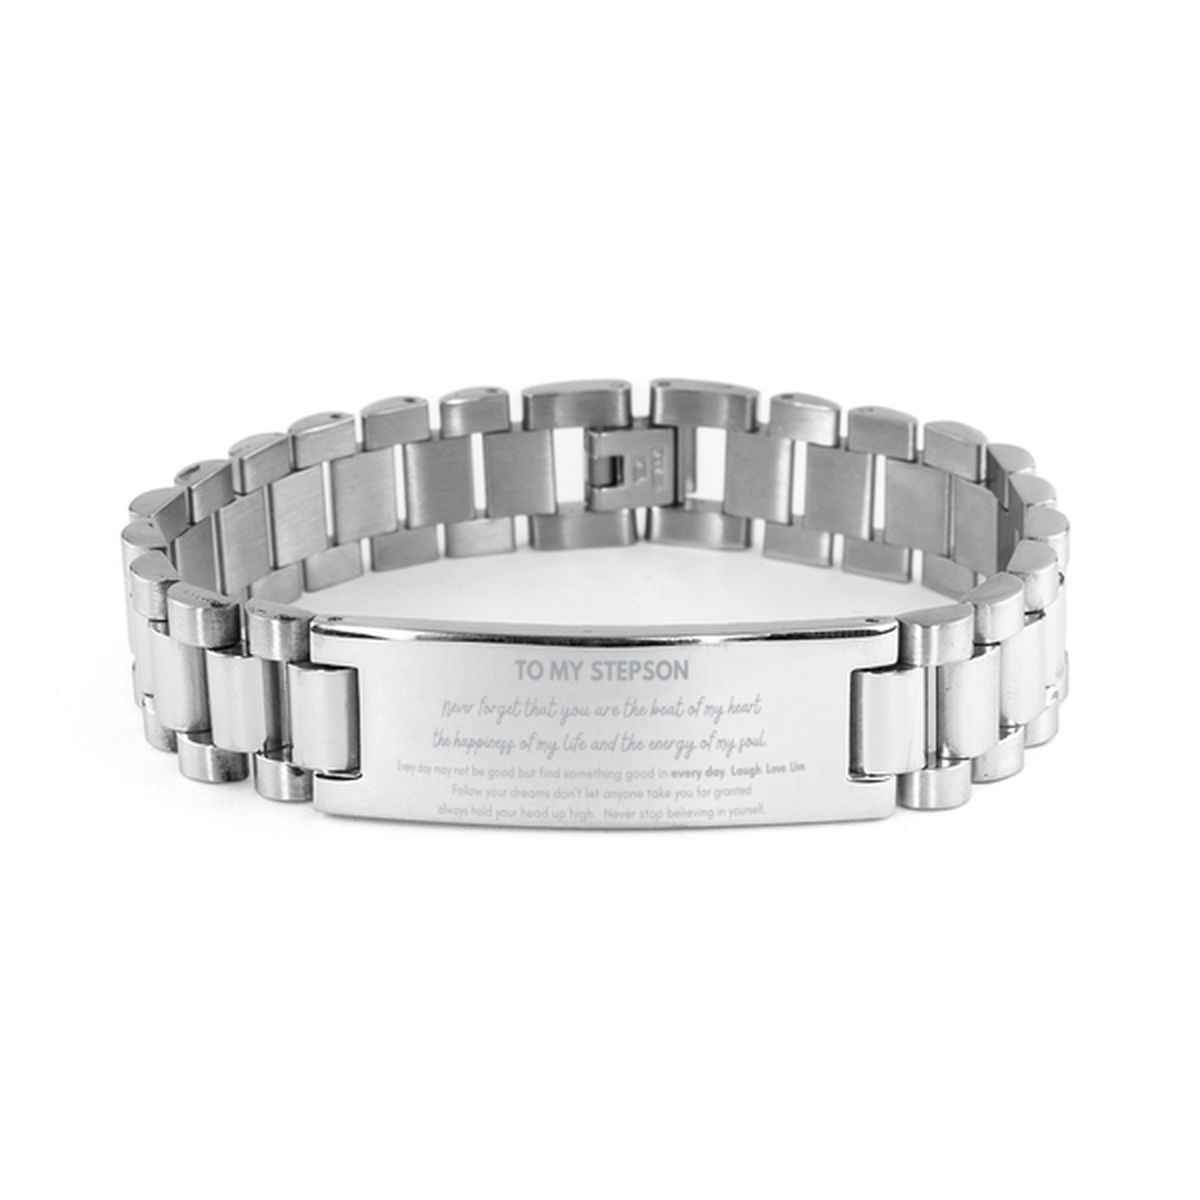 To My Stepson Bracelet Gifts, Christmas Stepson Ladder Stainless Steel Bracelet Present, Birthday Unique Motivational For Stepson, To My Stepson Never forget that you are the beat of my heart the happiness of my life and the energy of my soul